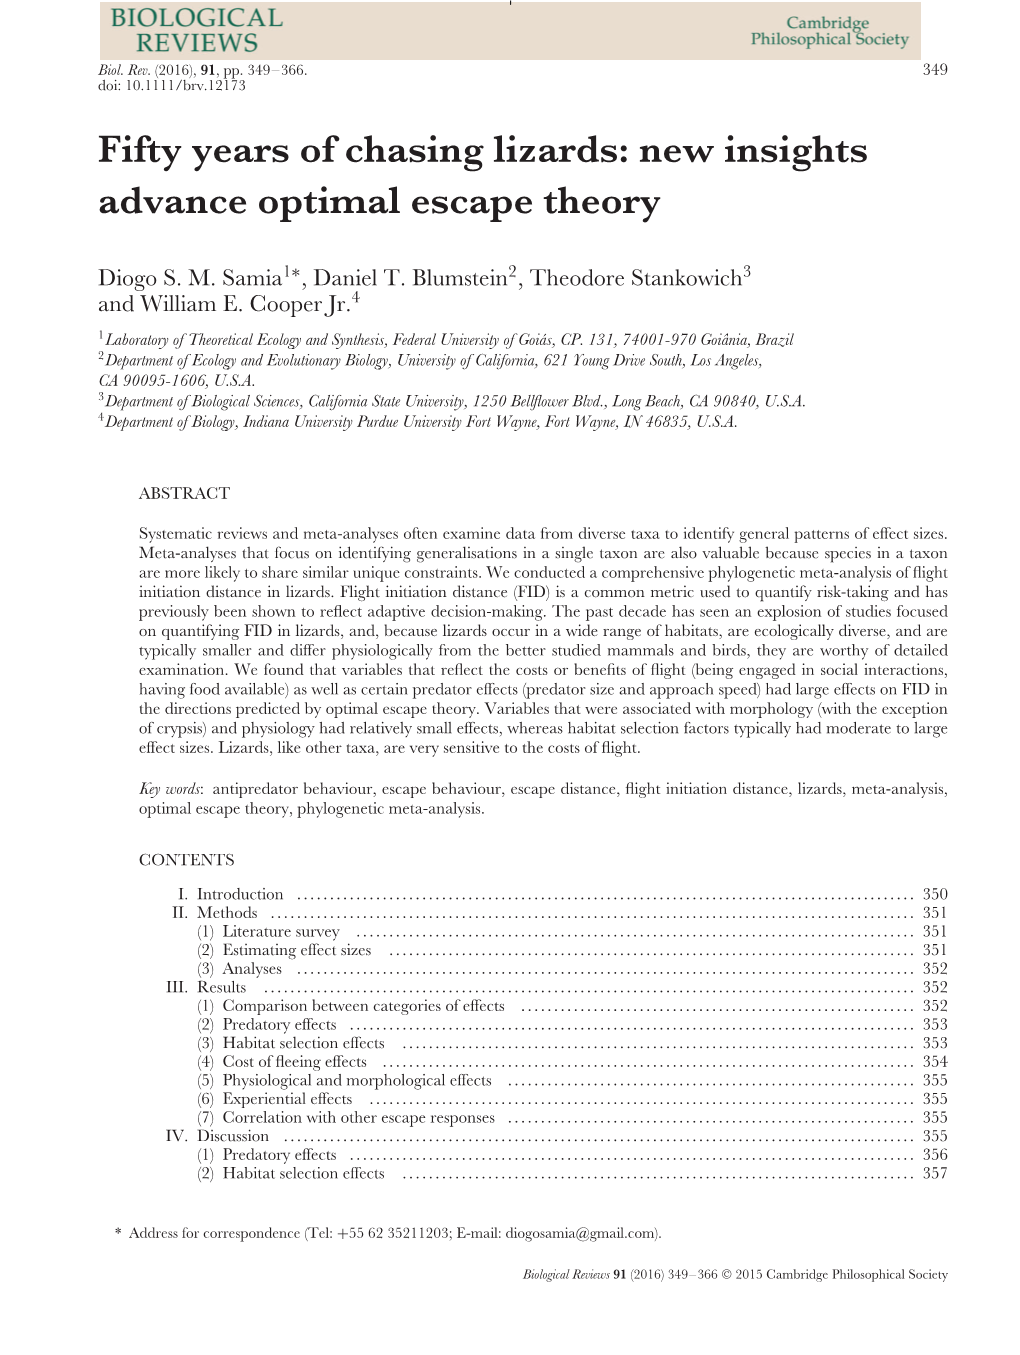 Fifty Years of Chasing Lizards: New Insights Advance Optimal Escape Theory